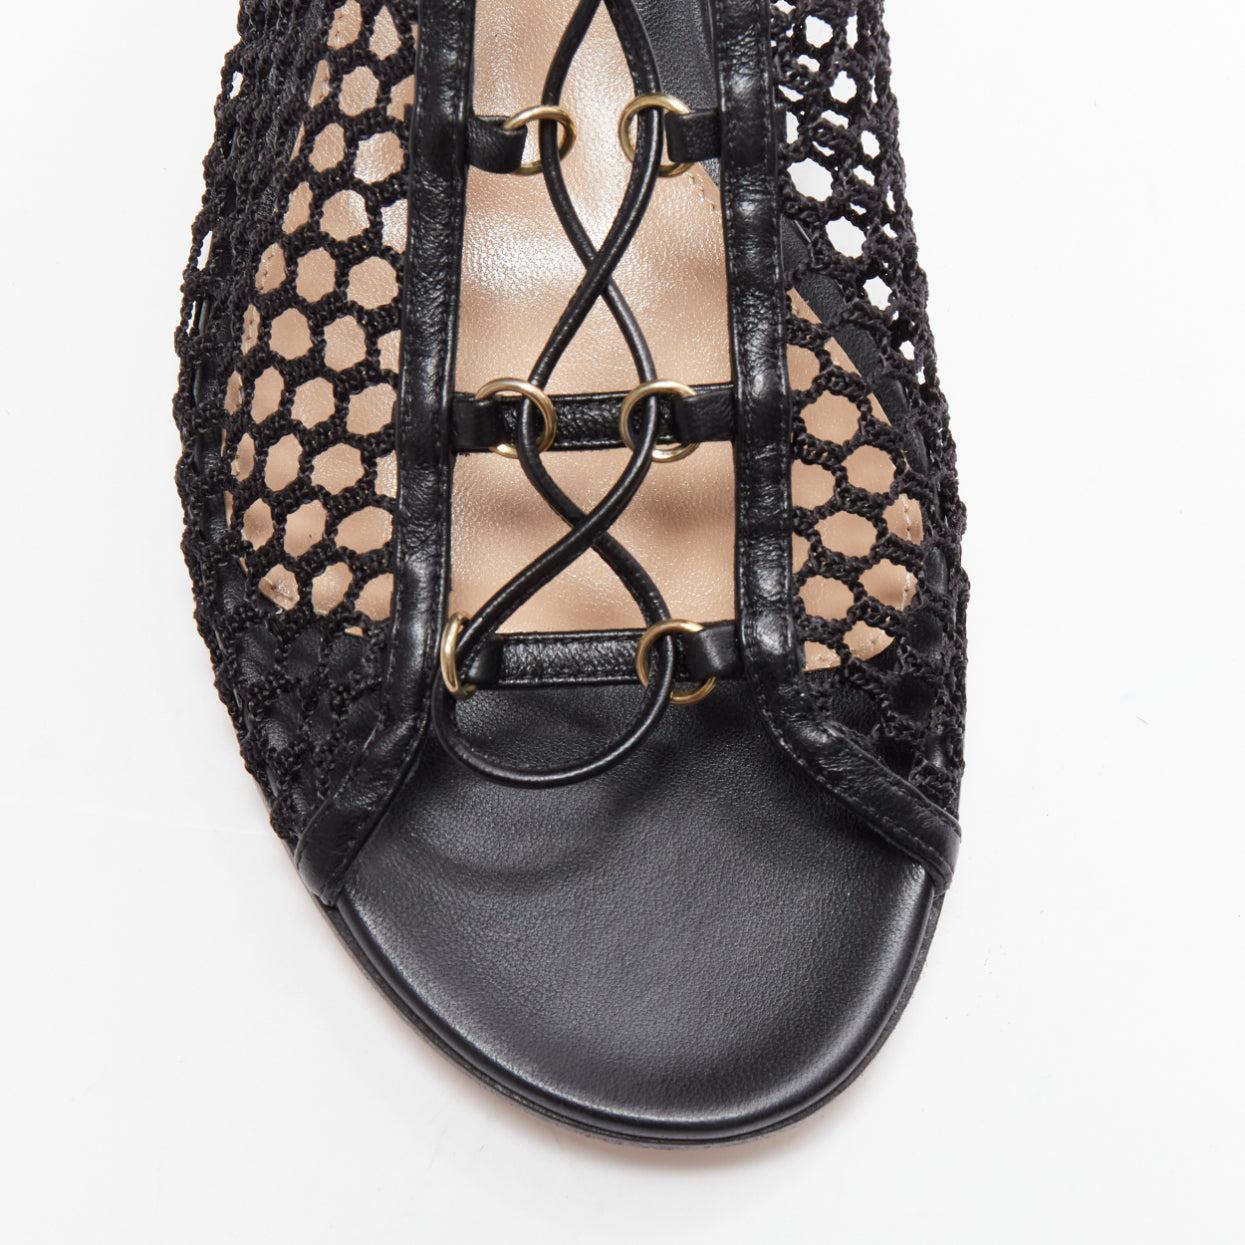 GIANVITO ROSSI Helena black crochet mesh gold rings lace up  sandals EU38 For Sale 1